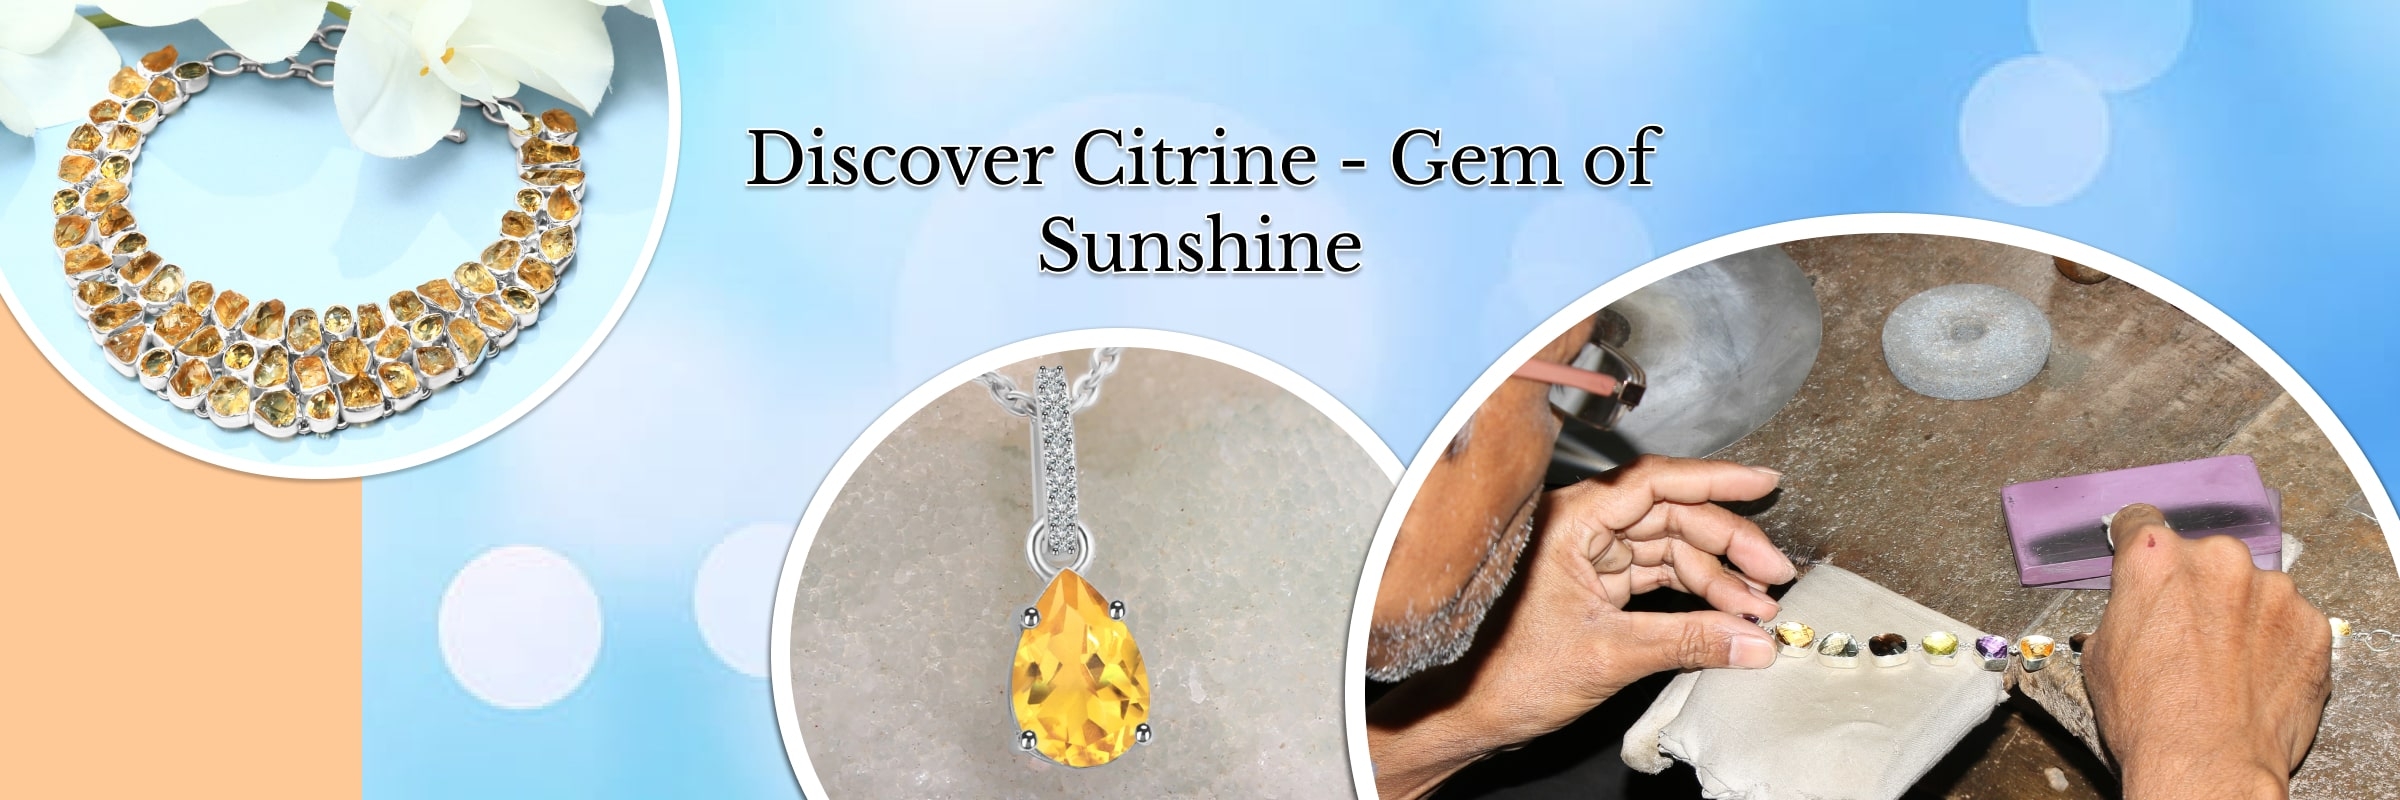 About Citrine